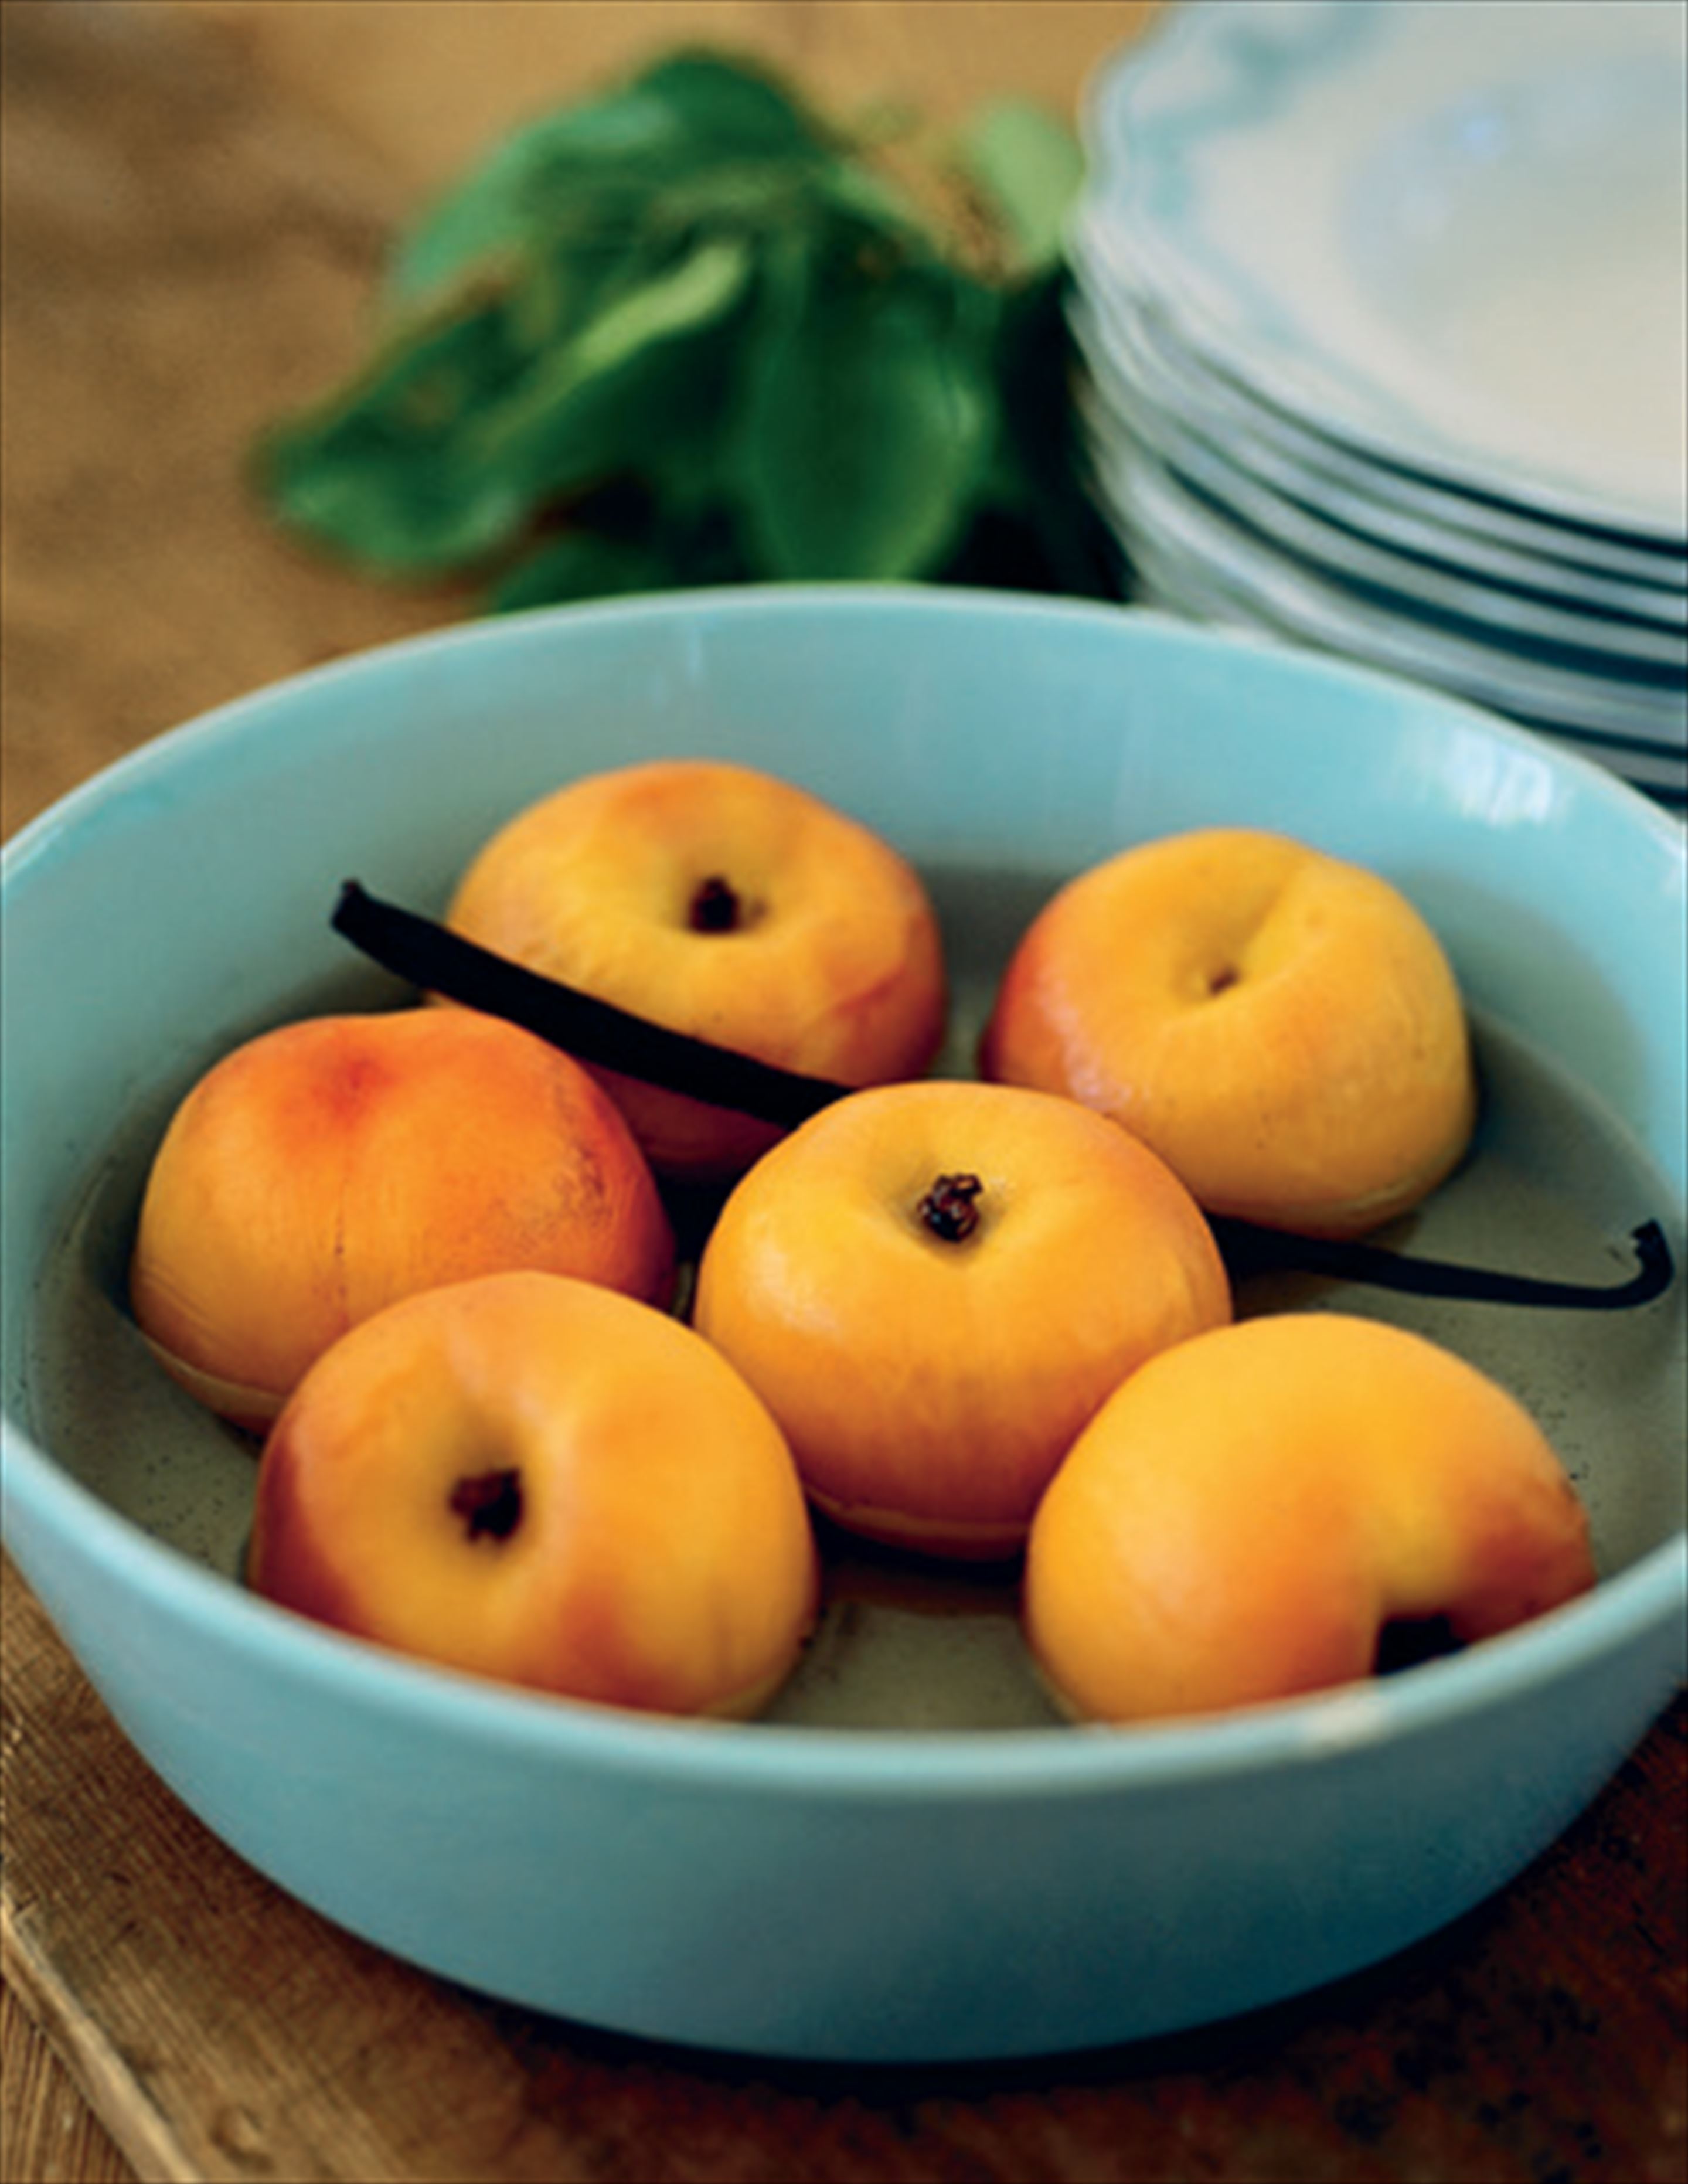 Vanilla-poached peaches or plums